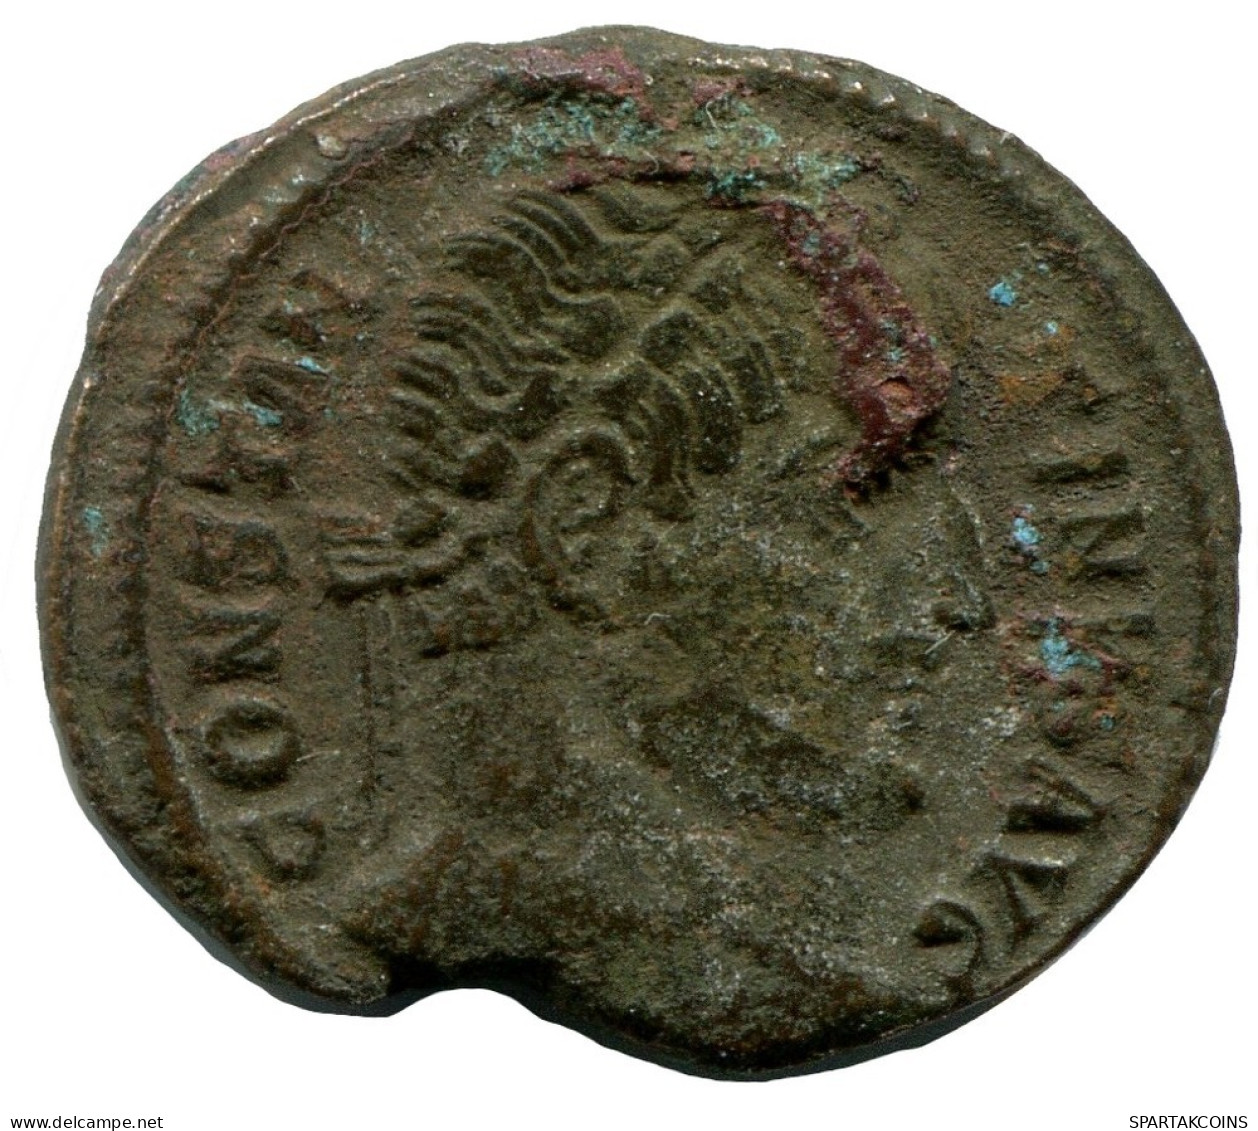 CONSTANTINE I MINTED IN ANTIOCH FOUND IN IHNASYAH HOARD EGYPT #ANC10613.14.D.A - El Imperio Christiano (307 / 363)